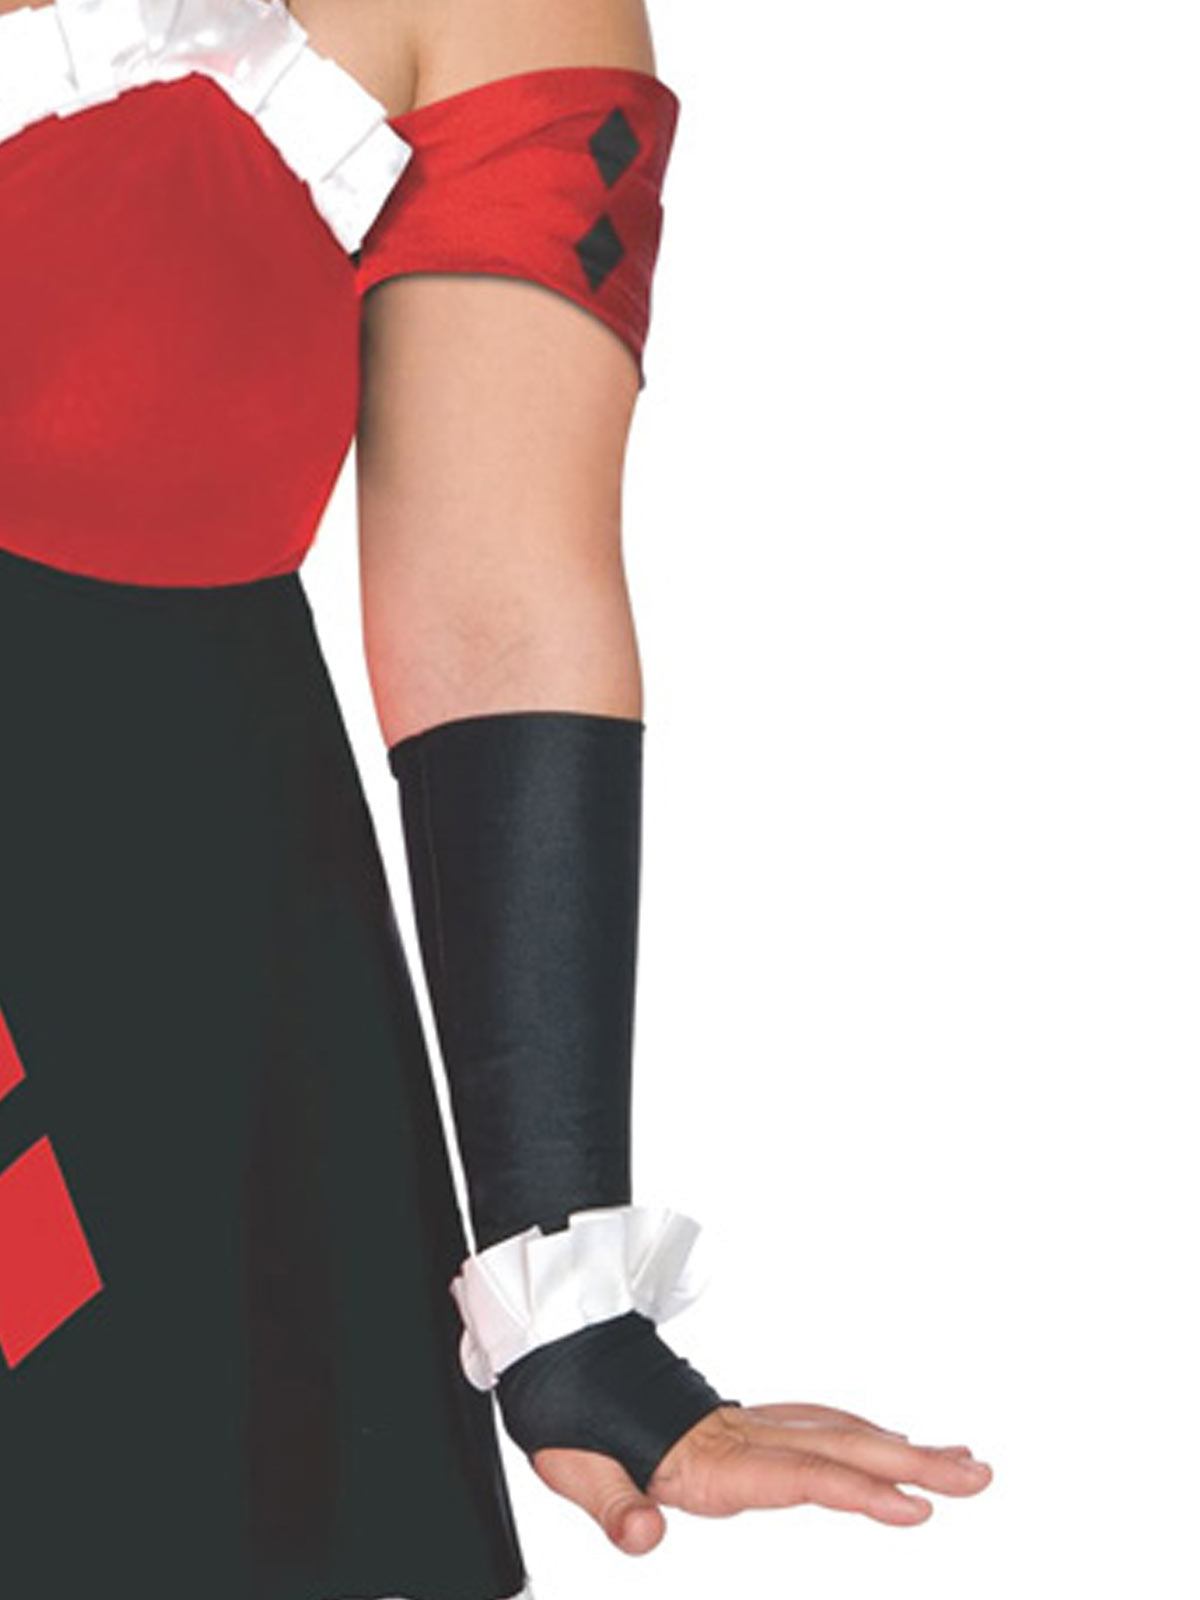 Deluxe Harley Quinn Plus Size Costume